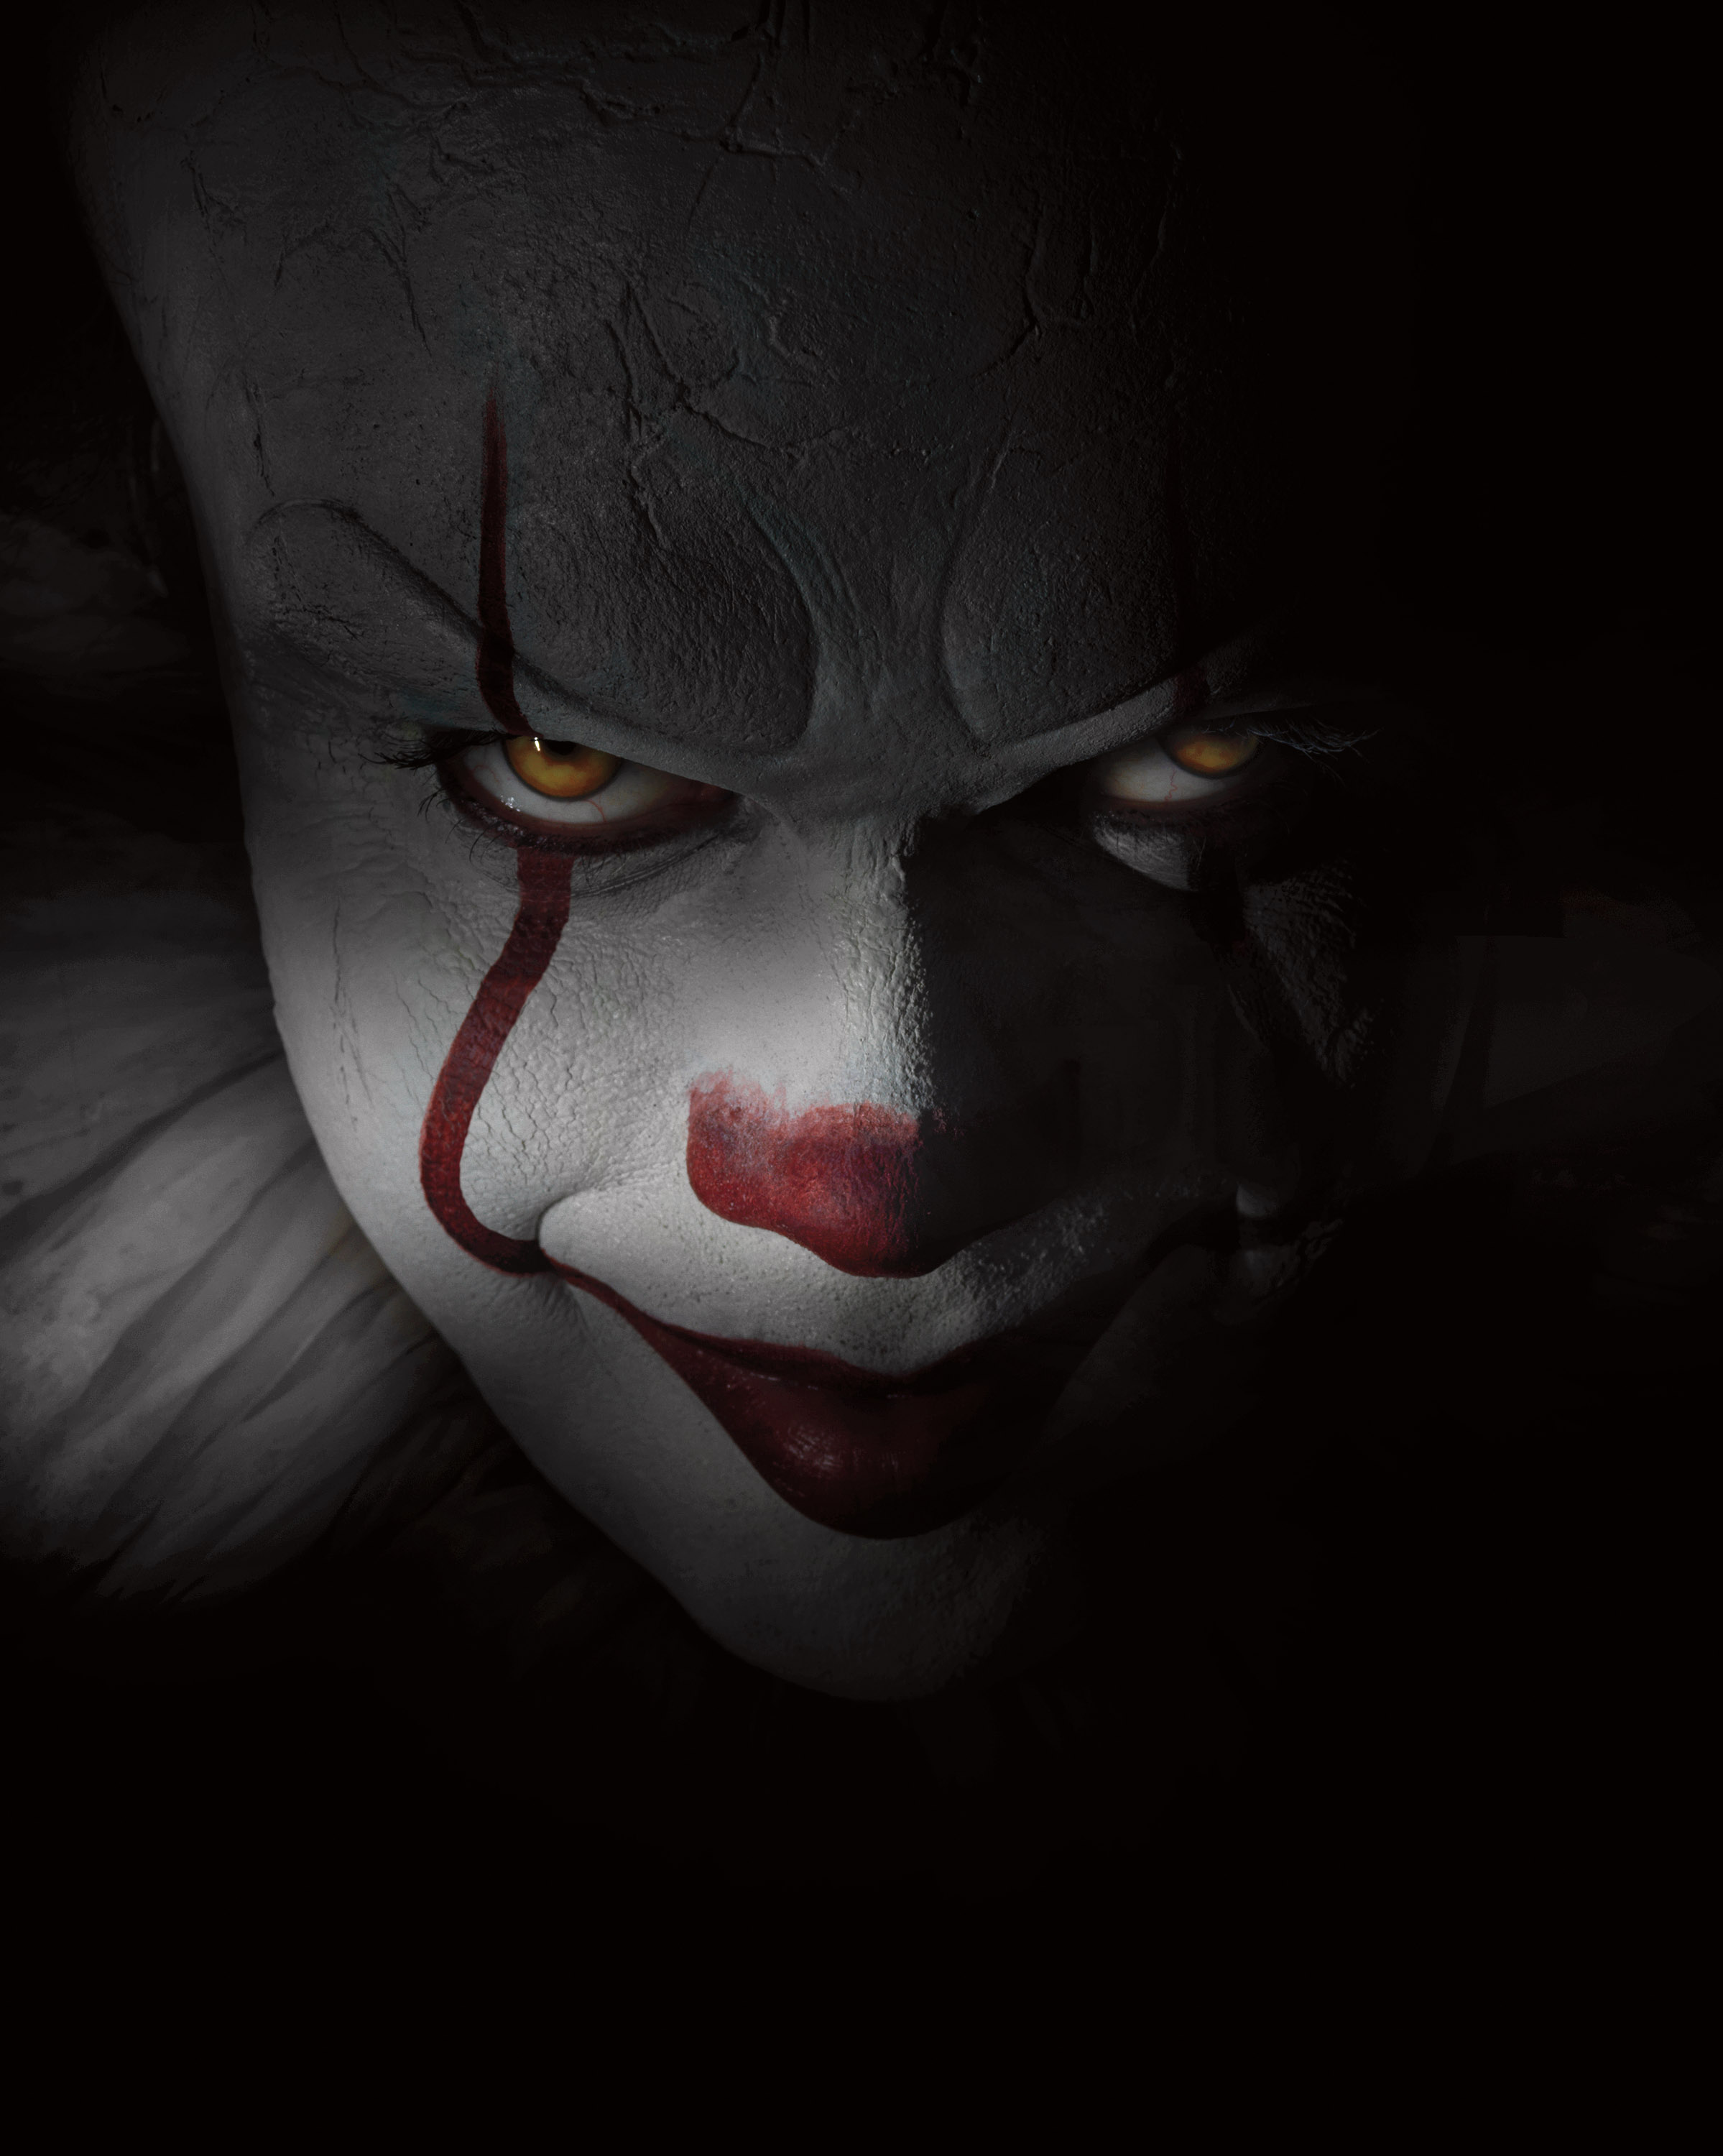 Pennywise has a very intense gaze.